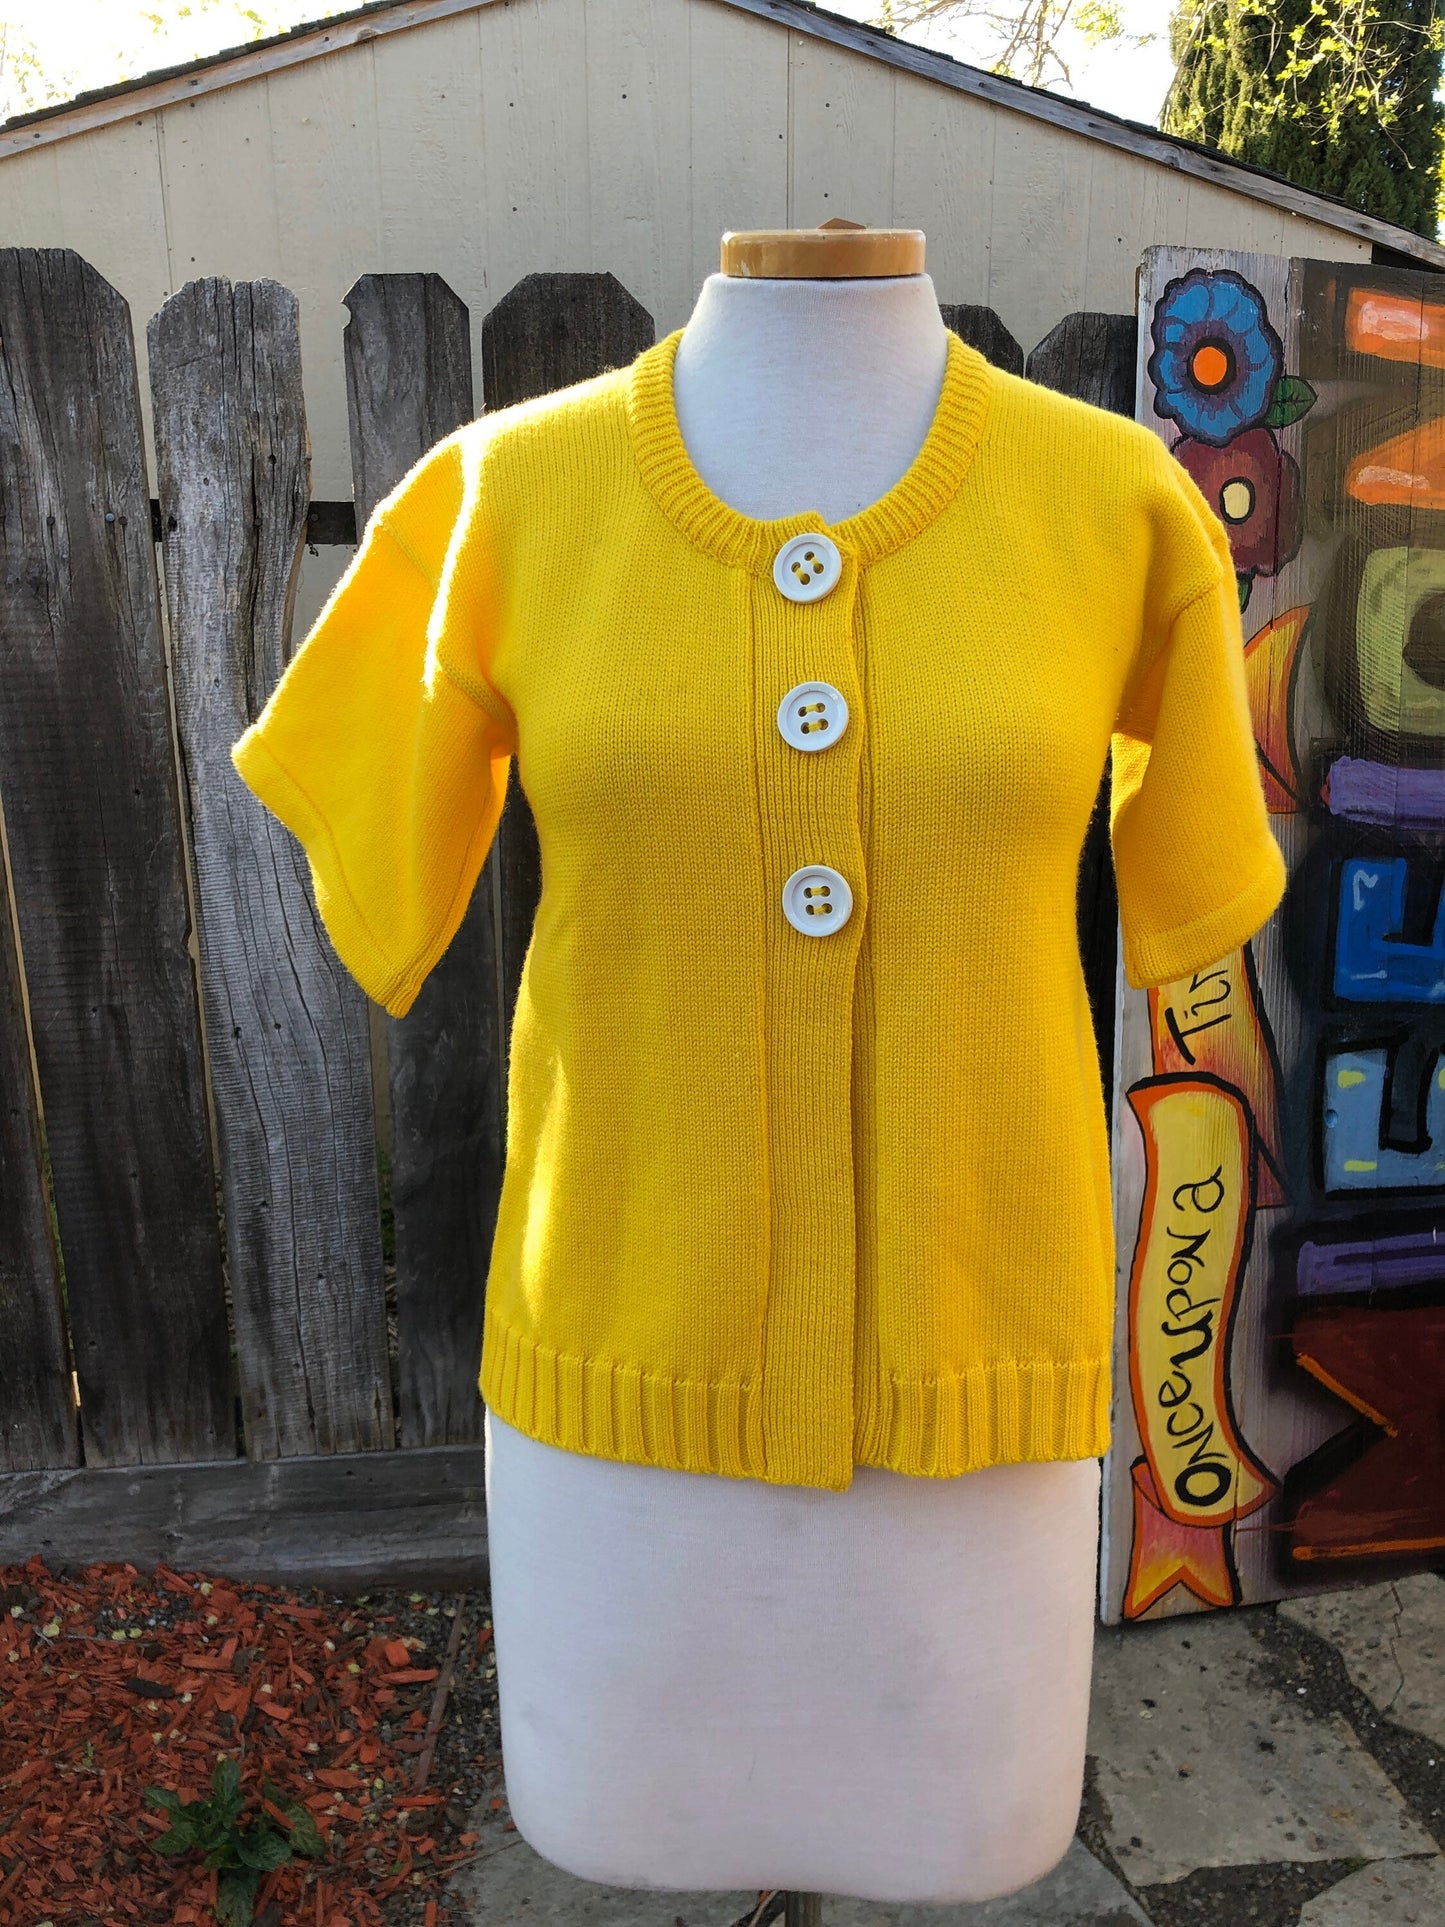 Vintage sterling silver 1960 Yellow Knit Half Sleeve Cardigan with big white buttons